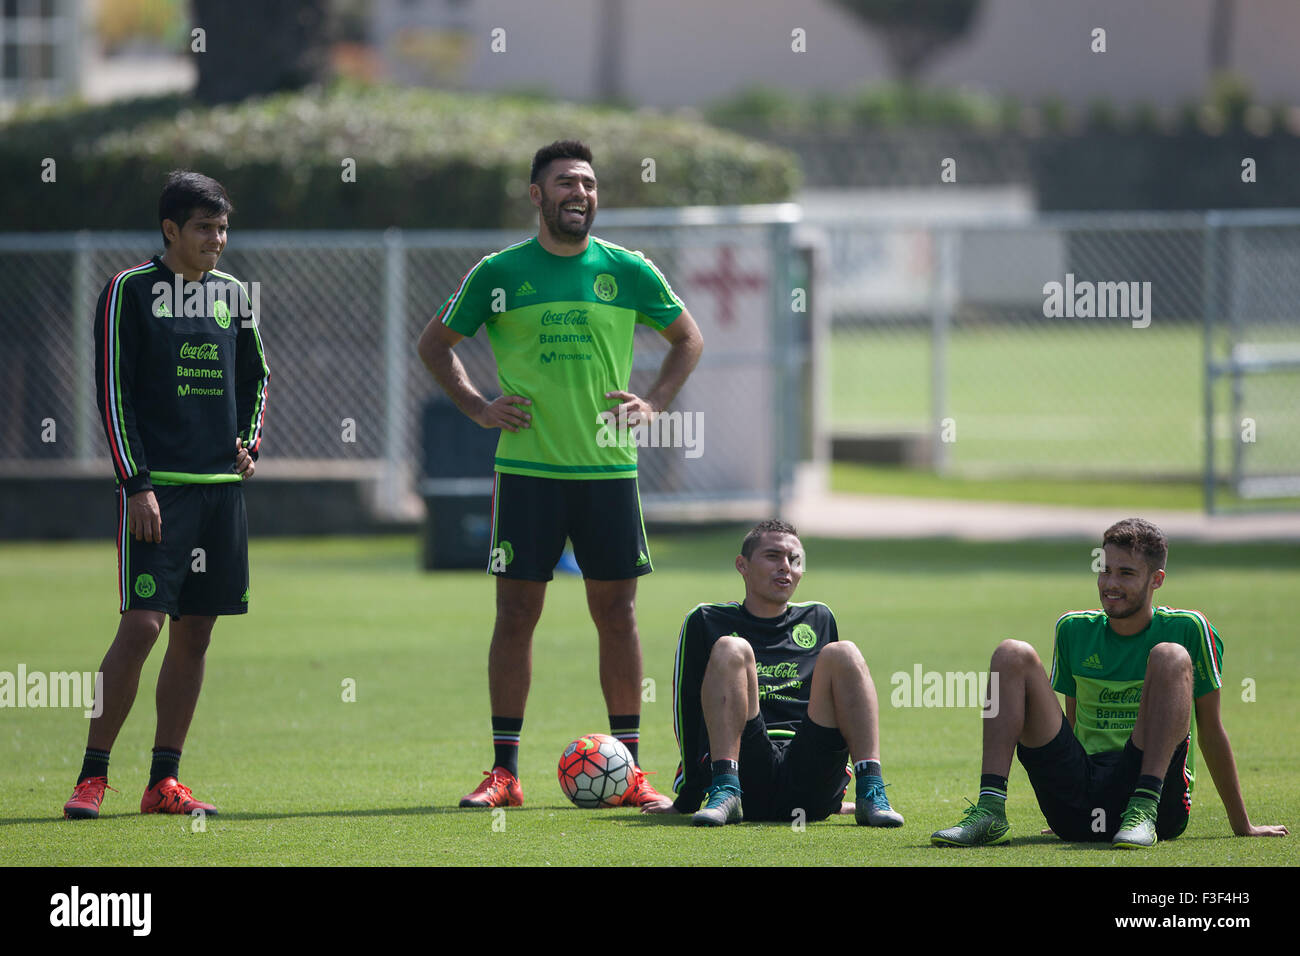 Mexico City, Mexico. 6th Oct, 2015. Mexico's national soccer team players Jose Rivas (2nd-L), Paul Aguilar (2nd-R), Diego Reyes (R), take part in a training session at High Performance Center of the Mexican Football Federation (CAR-FEMEXFUT, for its acronym in Spanish), in Mexico City, capital of Mexico, Oct. 6, 2015. Mexican national soccer team held a training session on Tuesday ahead of its match against the United States national soccer team for a spot in the Confederations Cup Russia 2017, to be played on Oct. 10 at Rose Bowl stadium in California. © Pedro Mera/Xinhua/Alamy Live News Stock Photo